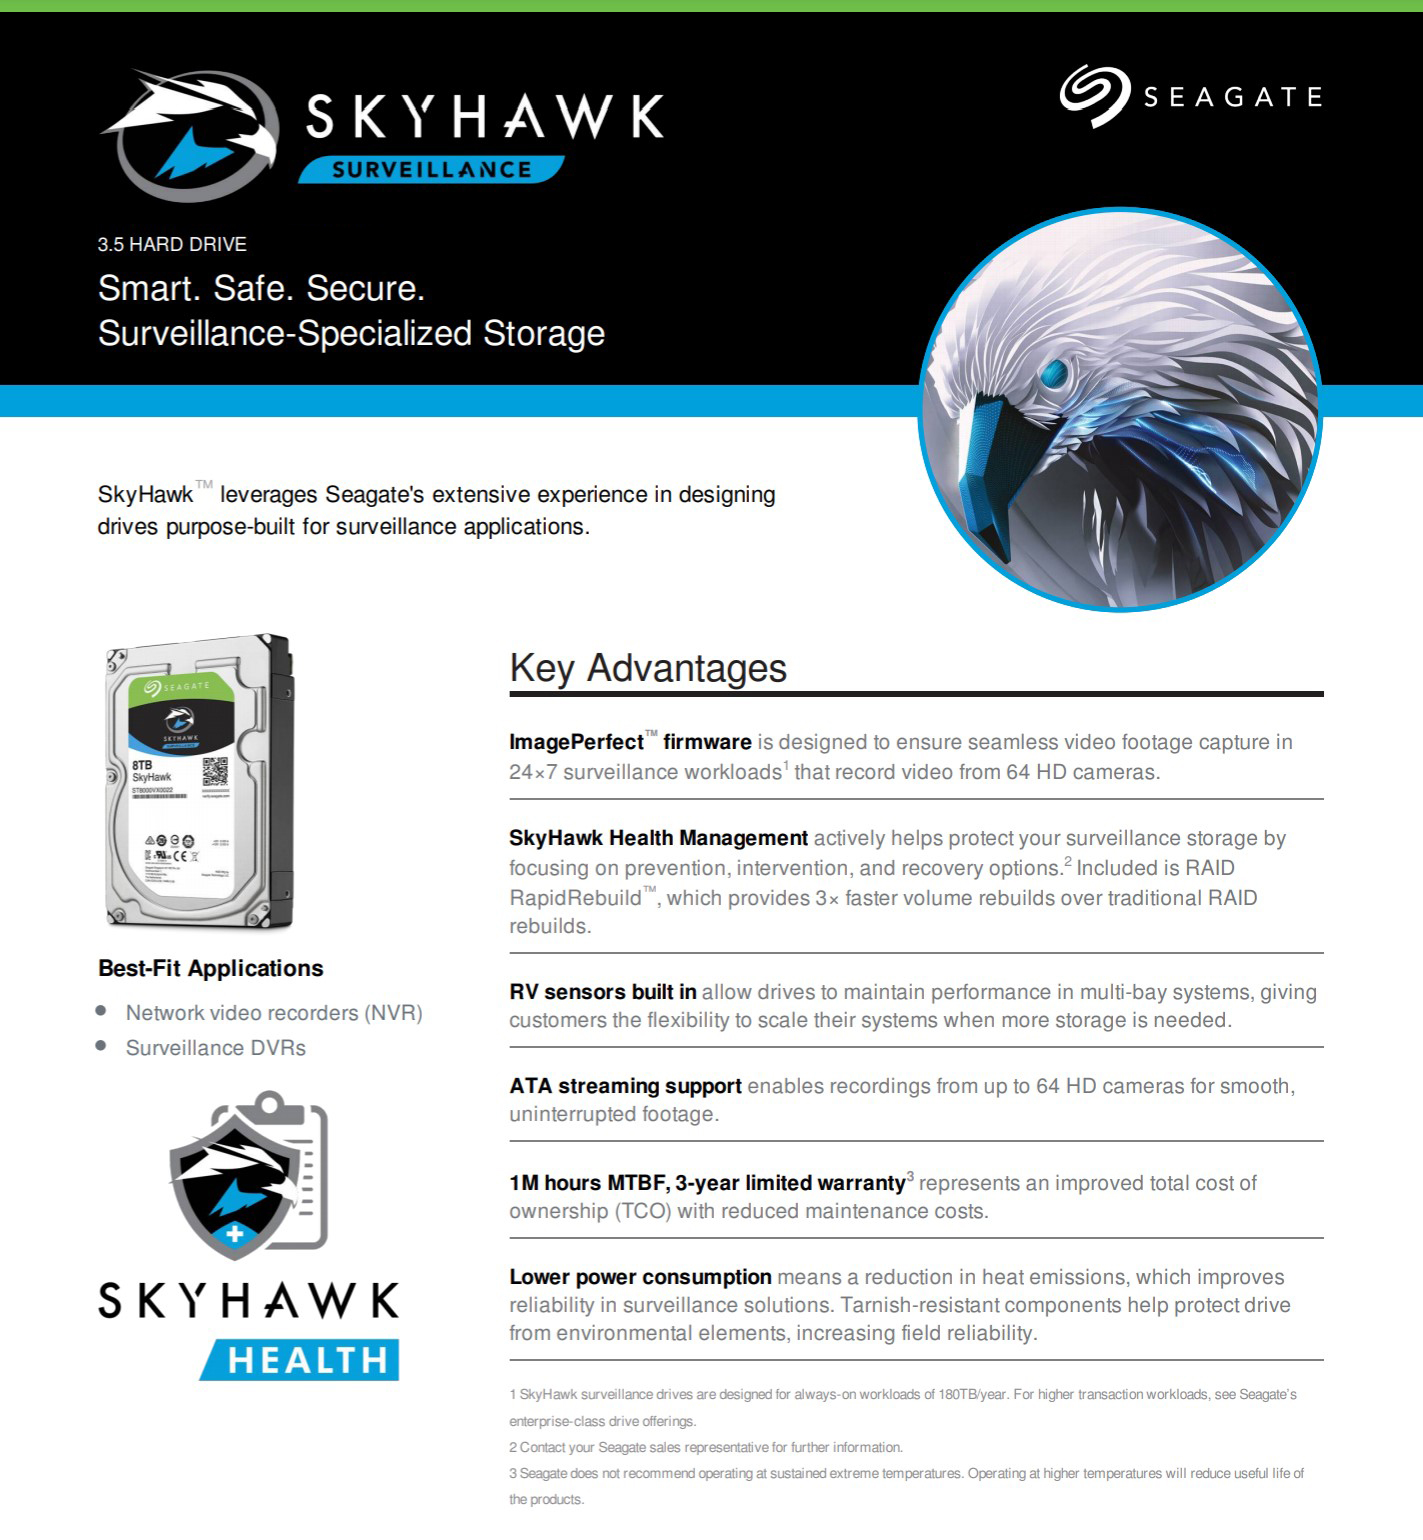 A large marketing image providing additional information about the product Seagate SkyHawk AI 3.5" Surveillance HDD - 8TB 256MB - Additional alt info not provided